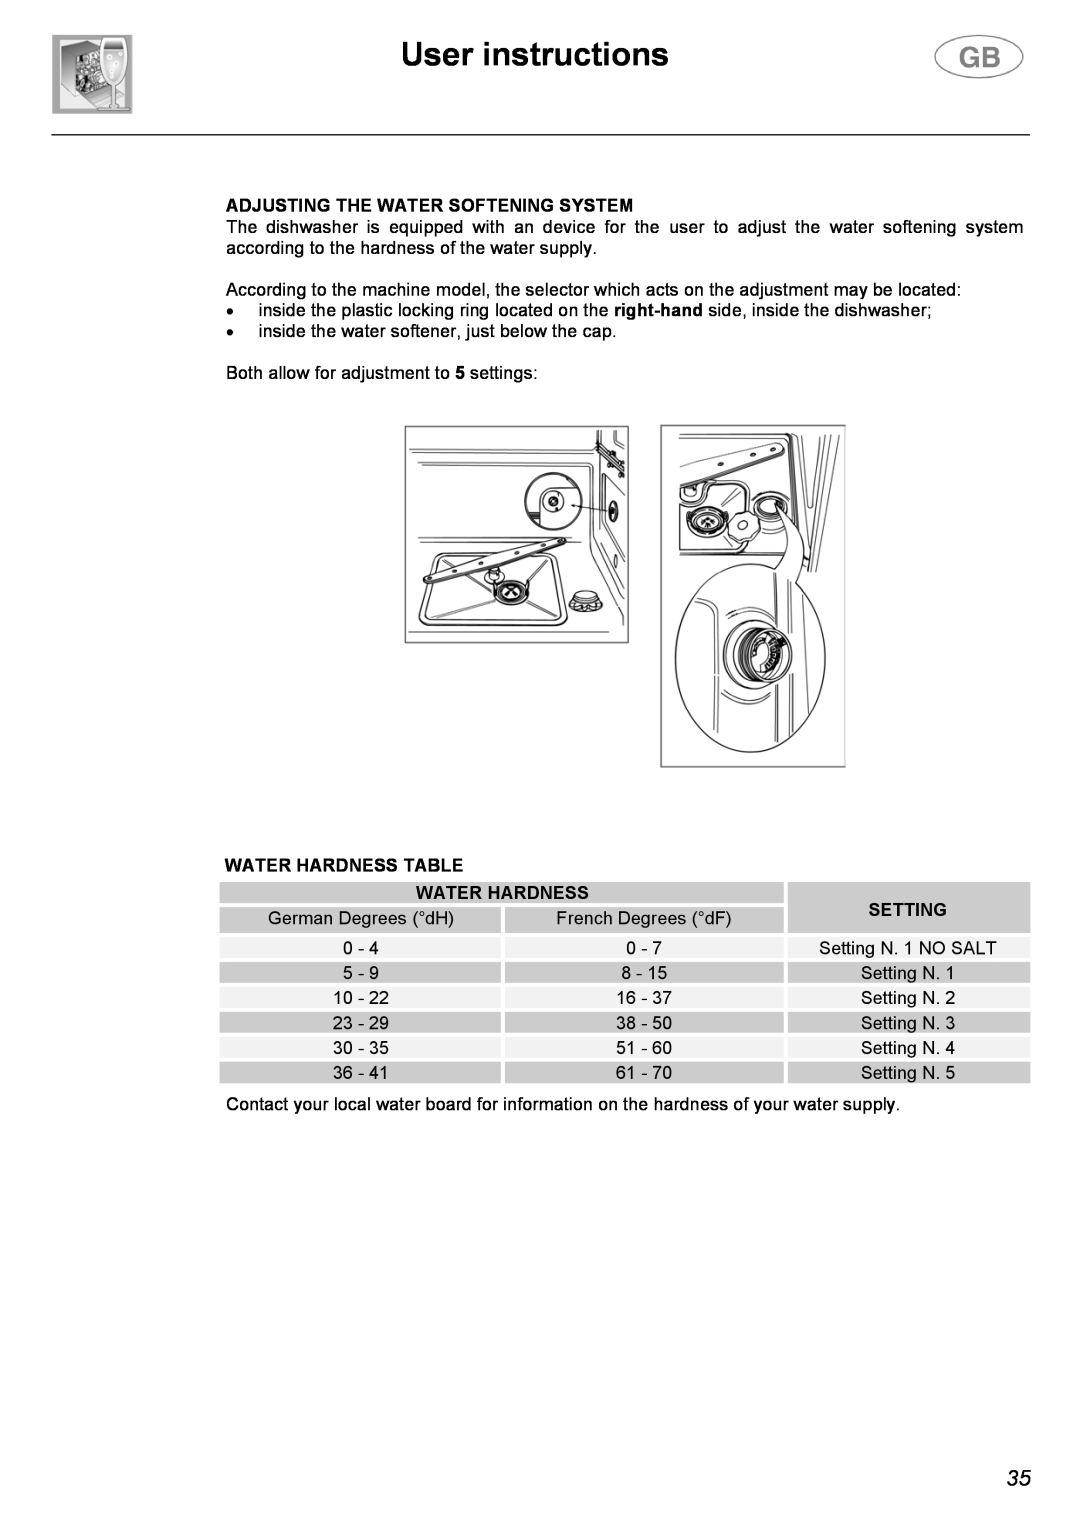 Smeg CA01-1 instruction manual User instructions, Adjusting The Water Softening System, Water Hardness Table, Setting 